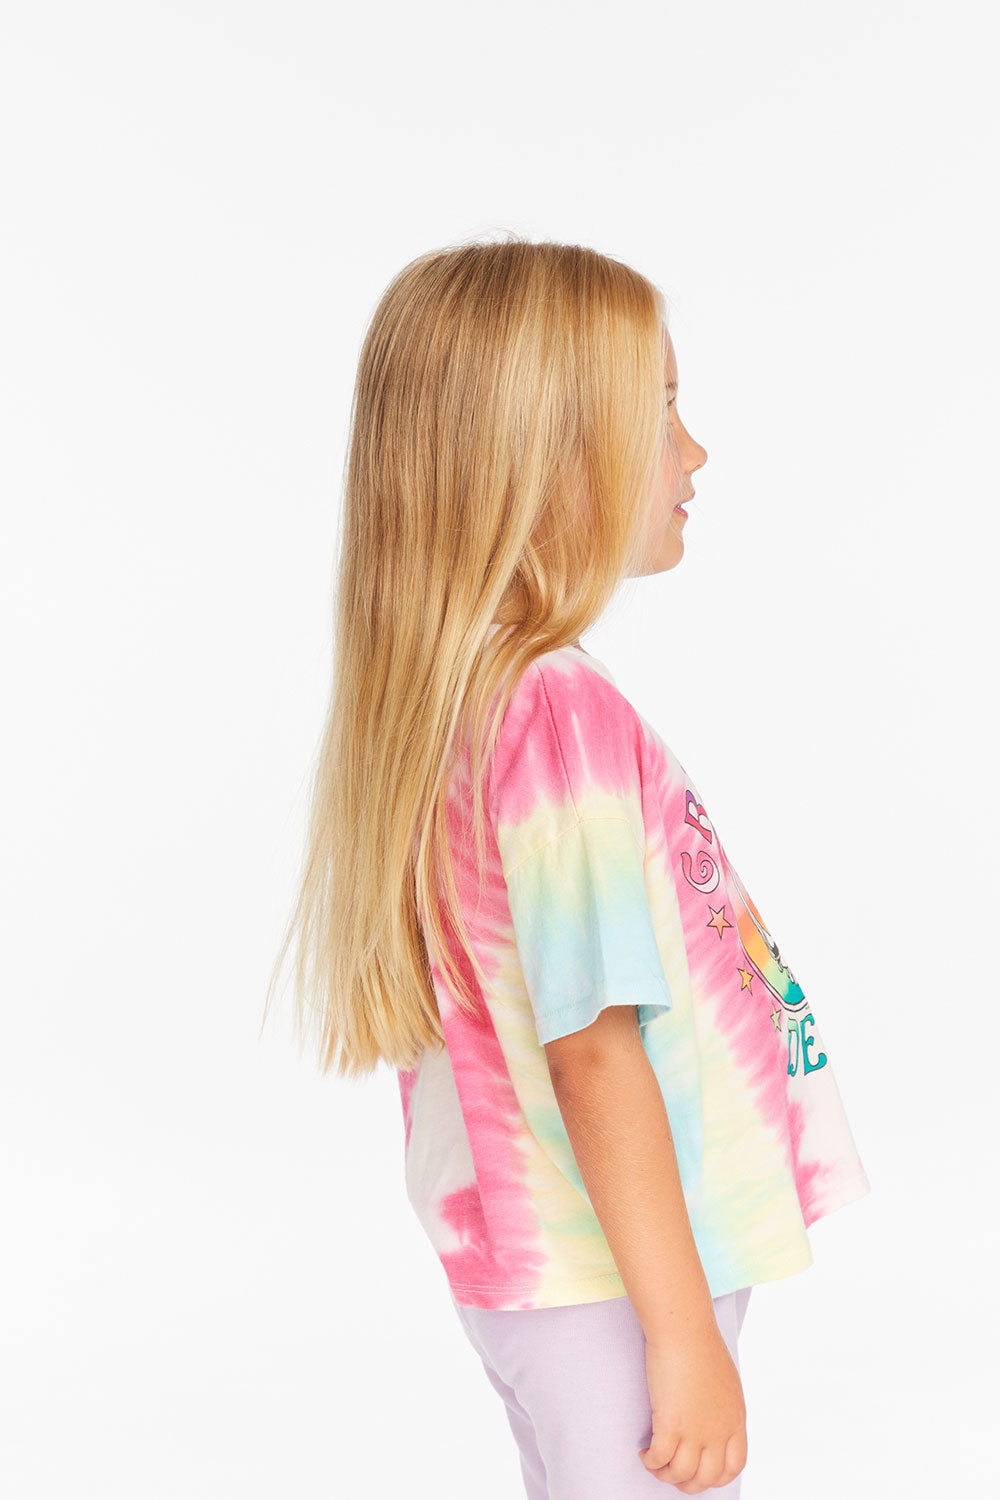 Grateful Dead Tie Dye Steal Your Face Tee Girls chaserbrand